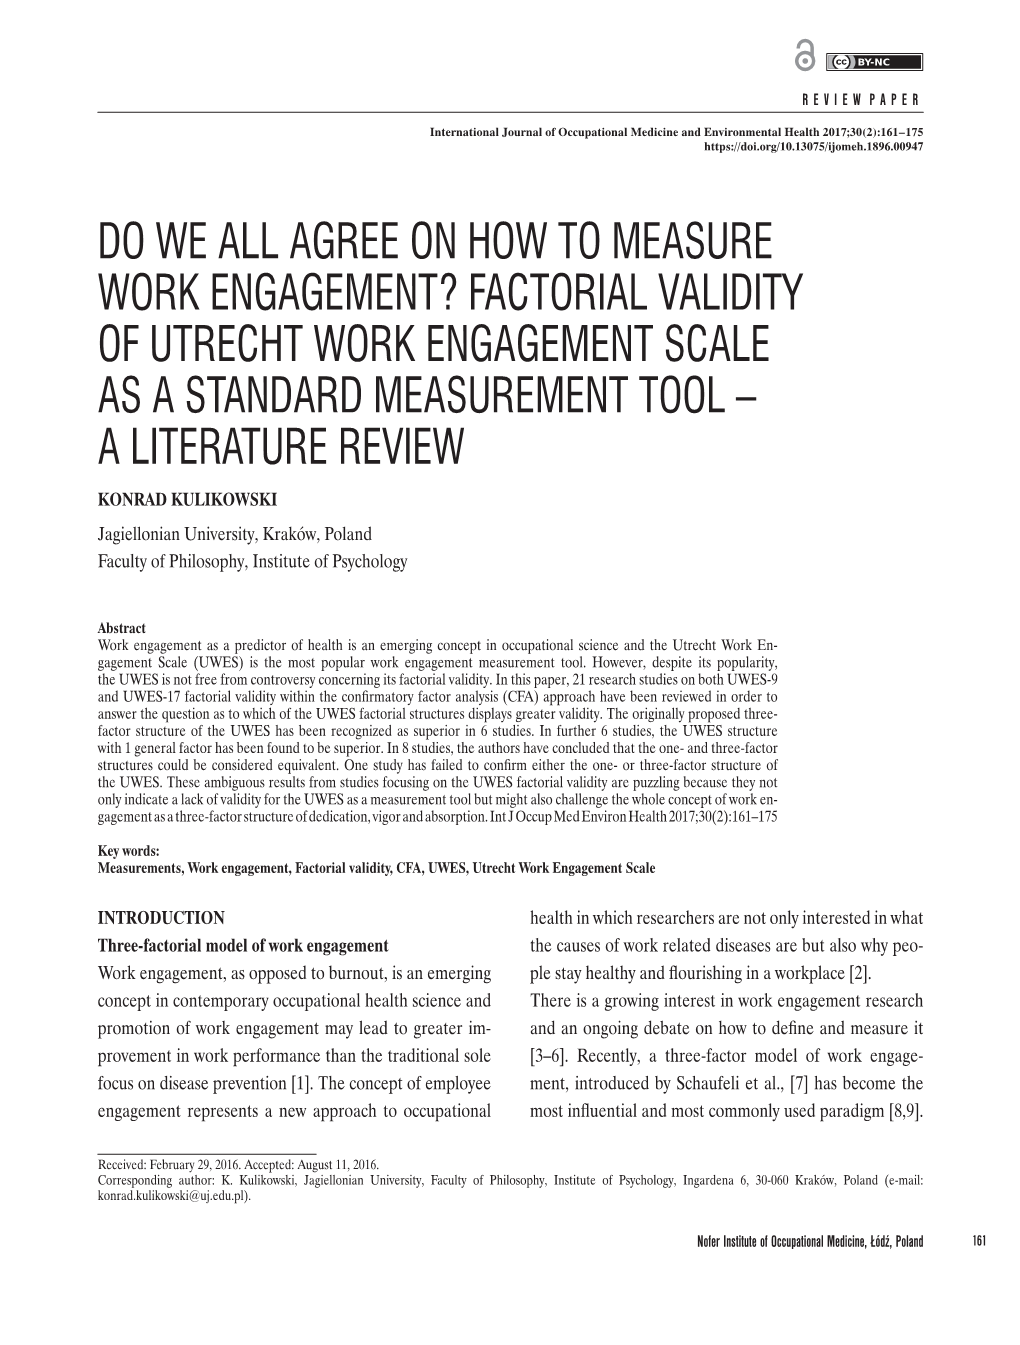 Factorial Validity of Utrecht Work Engagement Scale As